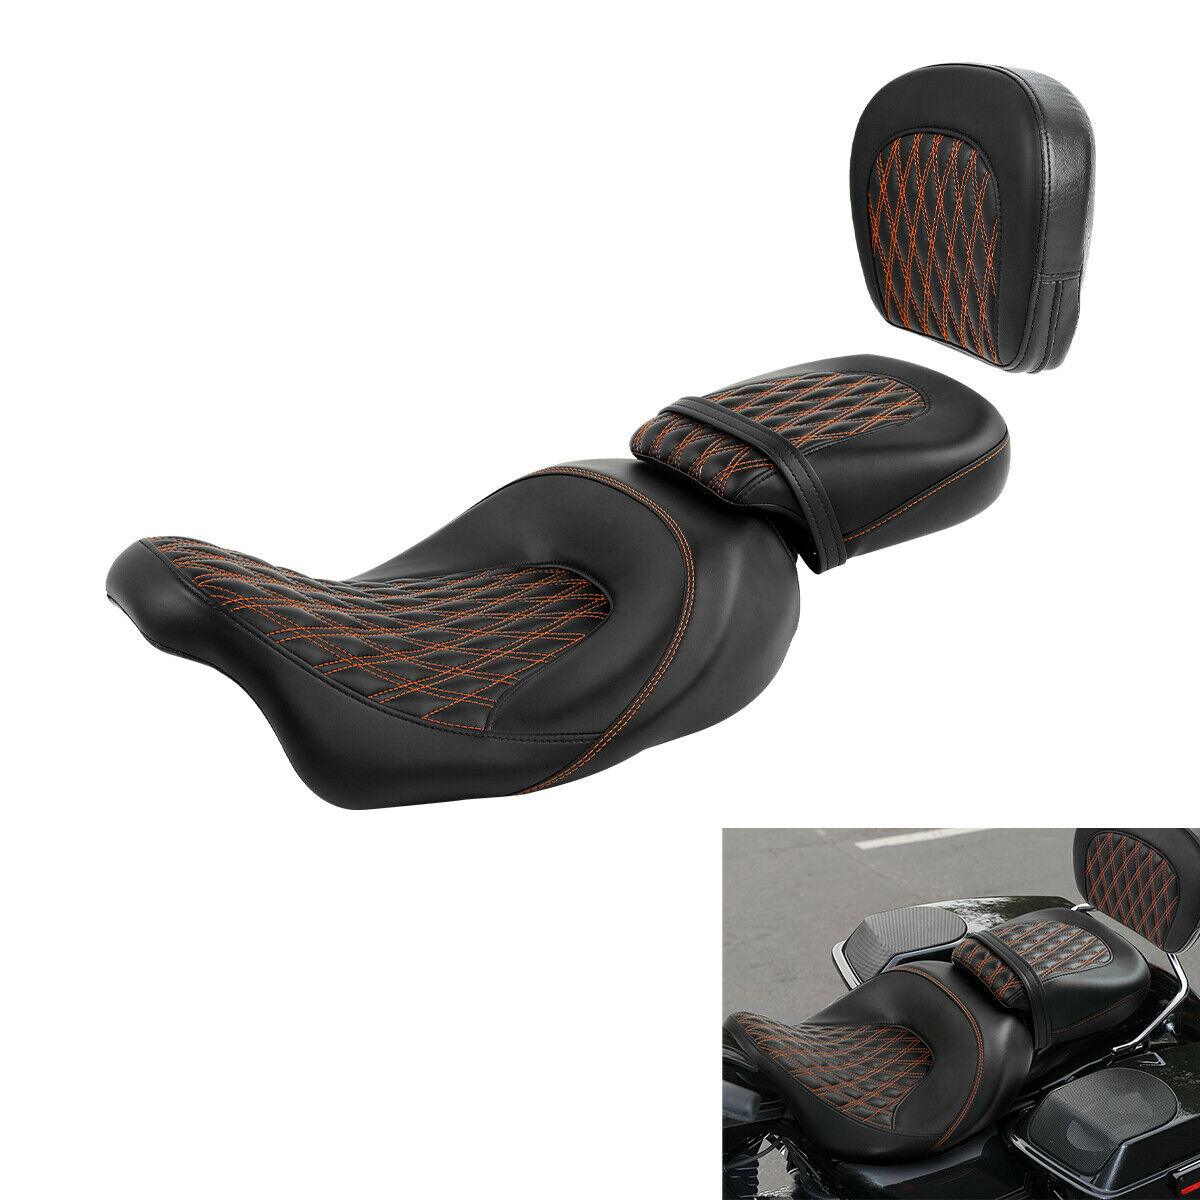 Driver Passenger Seat & Sissy Bar Fit For Harley Touring Road Glide King 09-21 - Moto Life Products